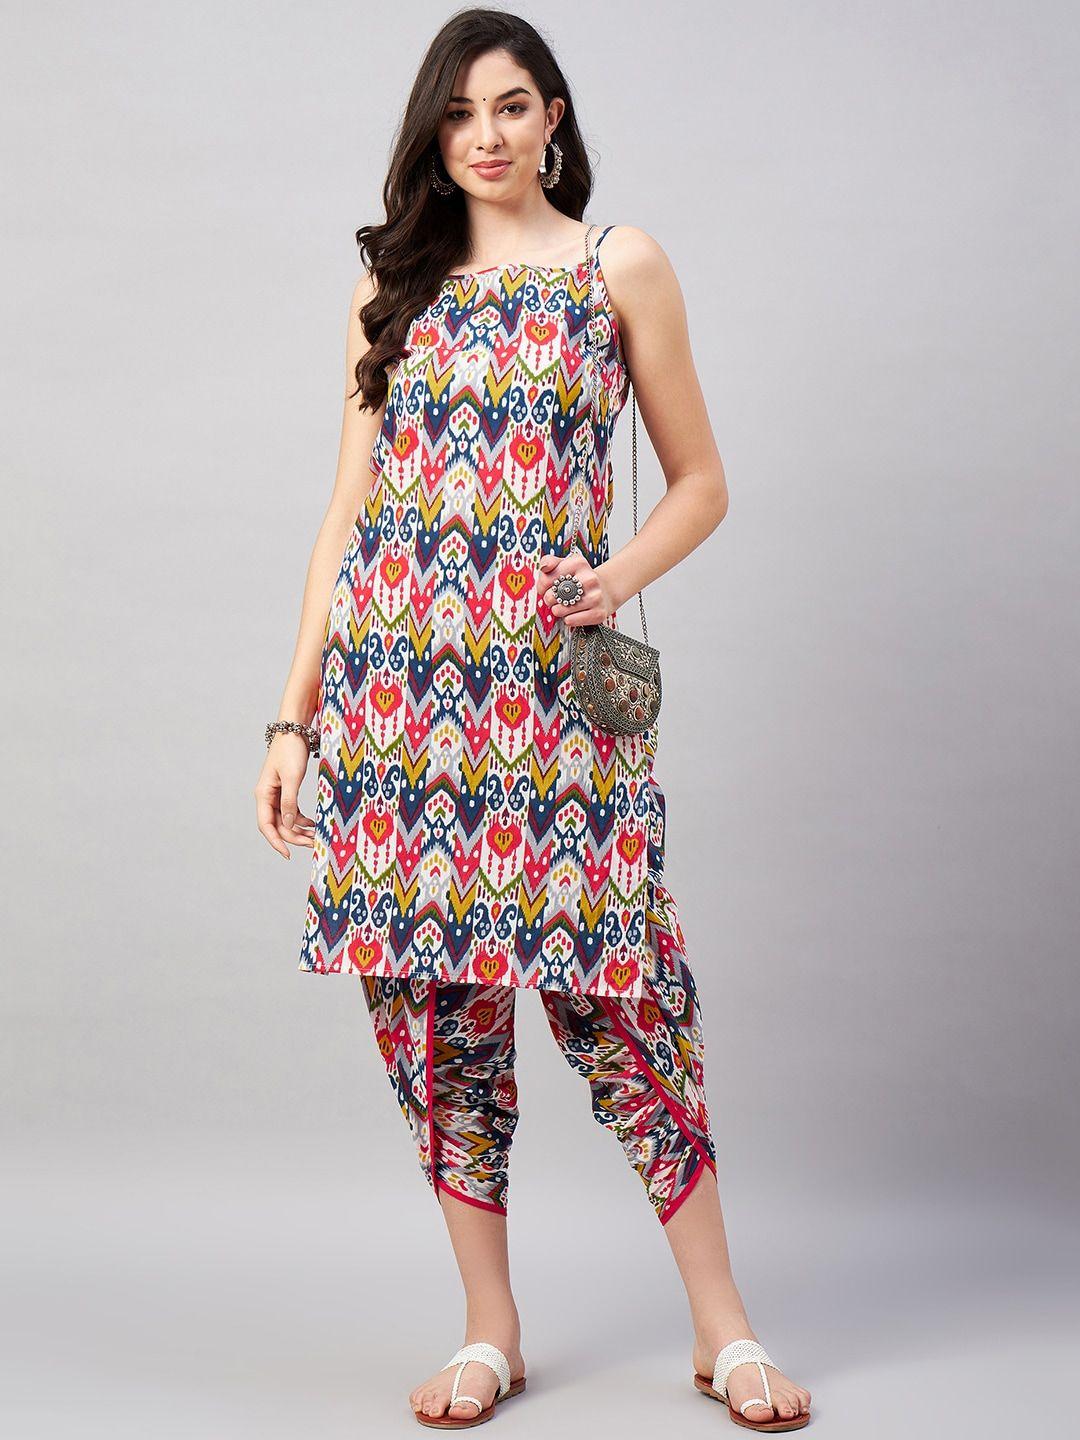 winered printed pure cotton top & dhoti pants co-ords